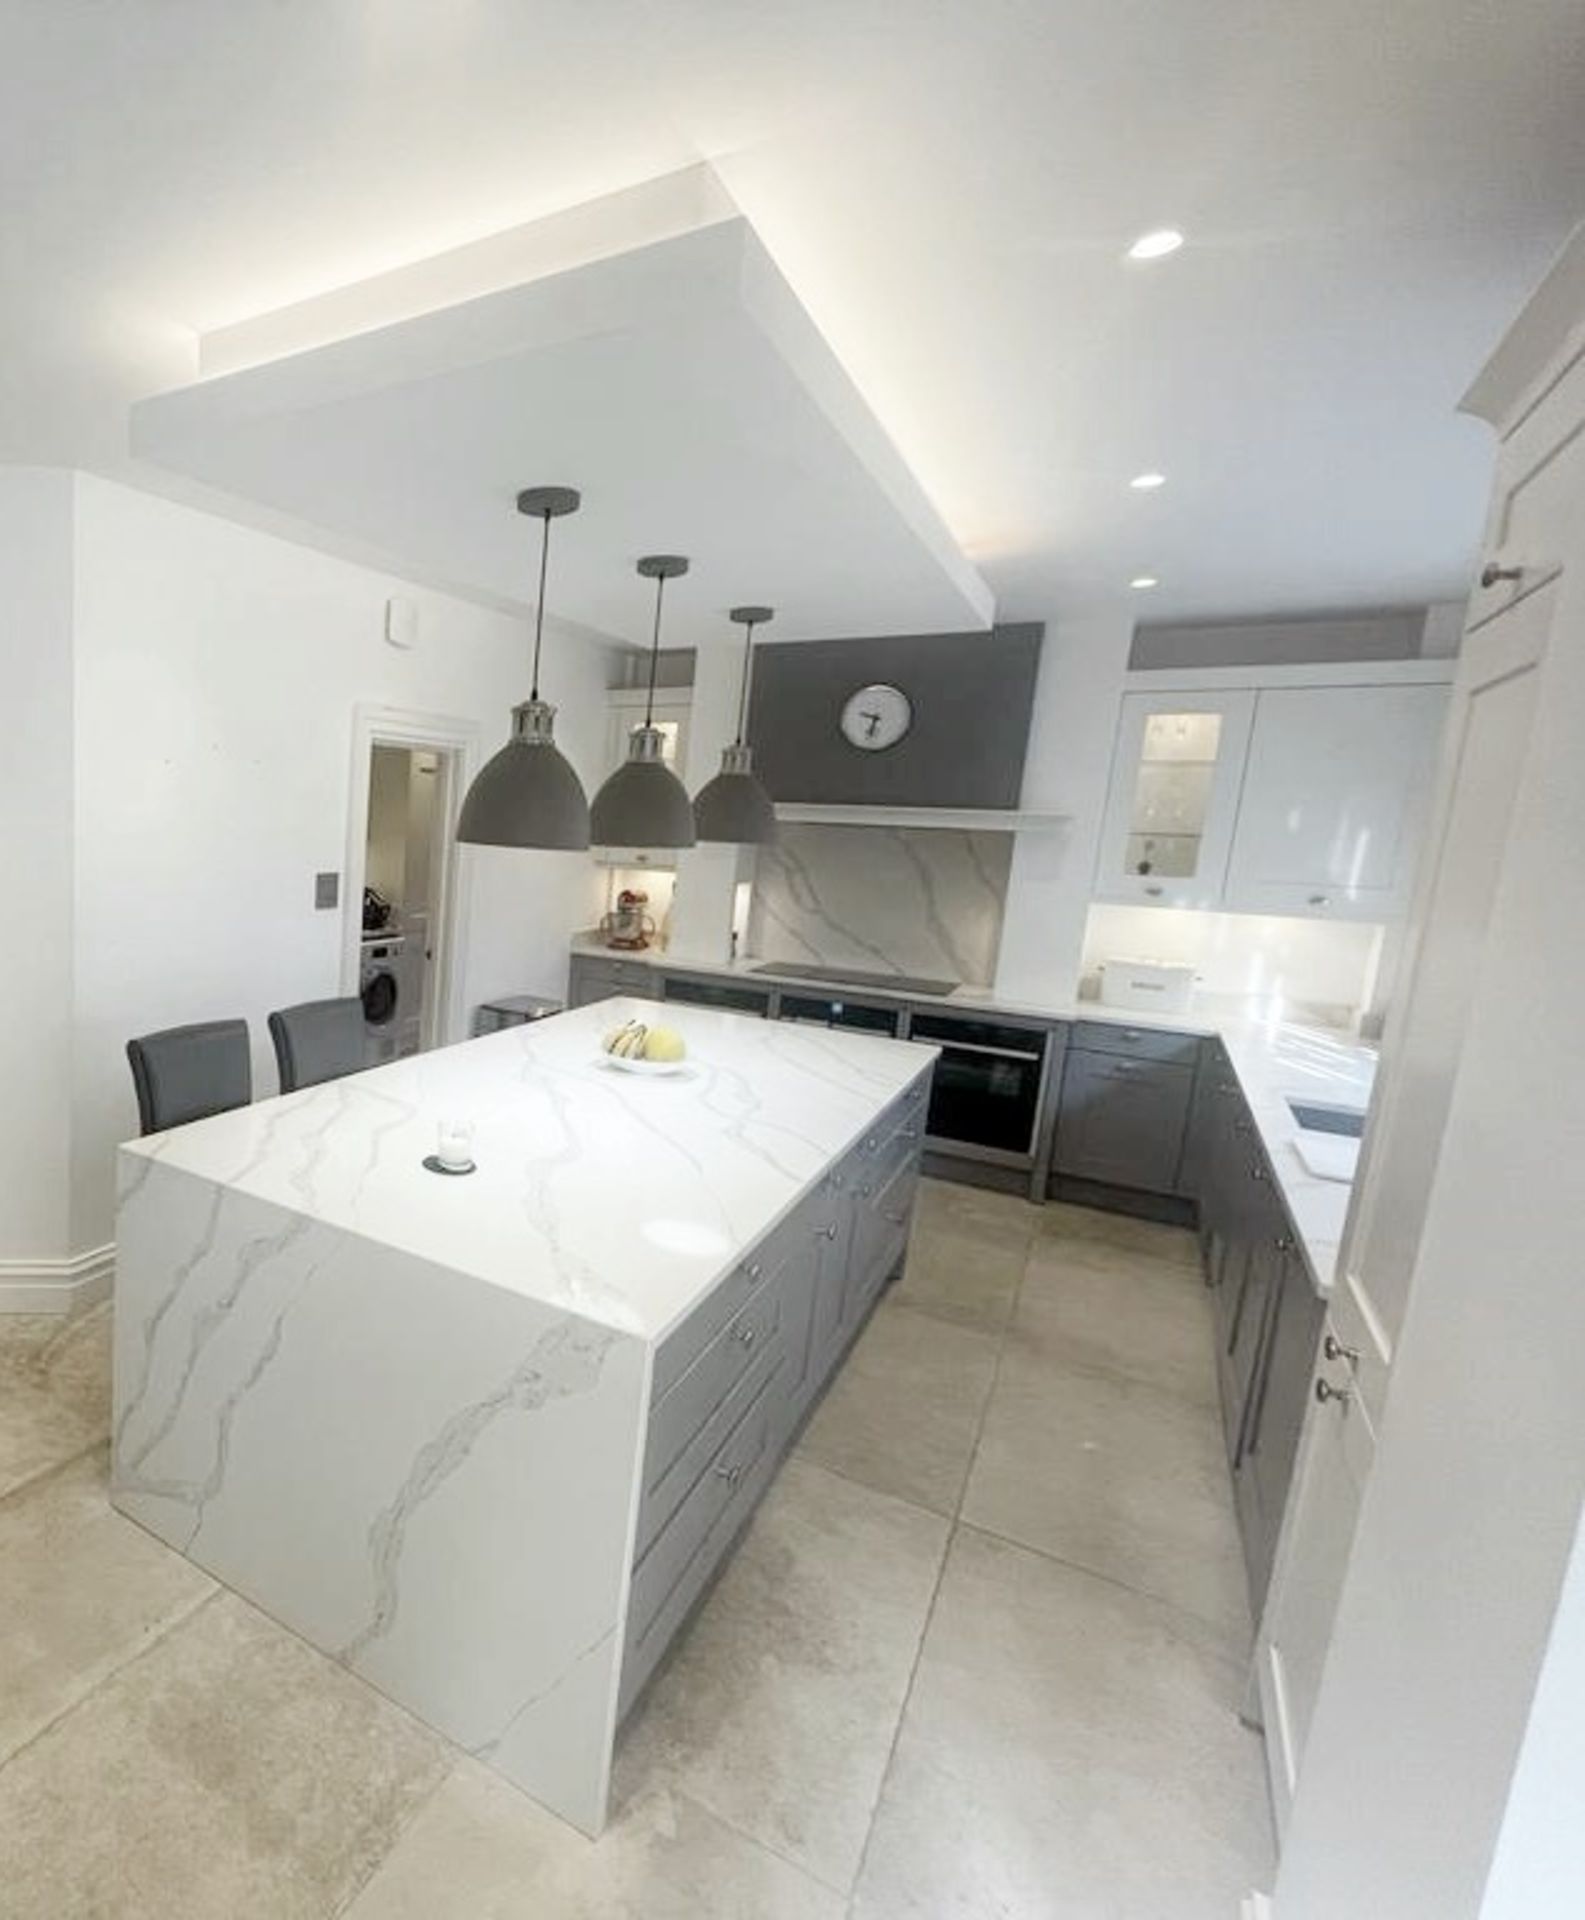 1 x SIEMATIC Bespoke Shaker-style Fitted Kitchen, Utility Room, Appliances & Modern Quartz Surfaces - Image 4 of 153